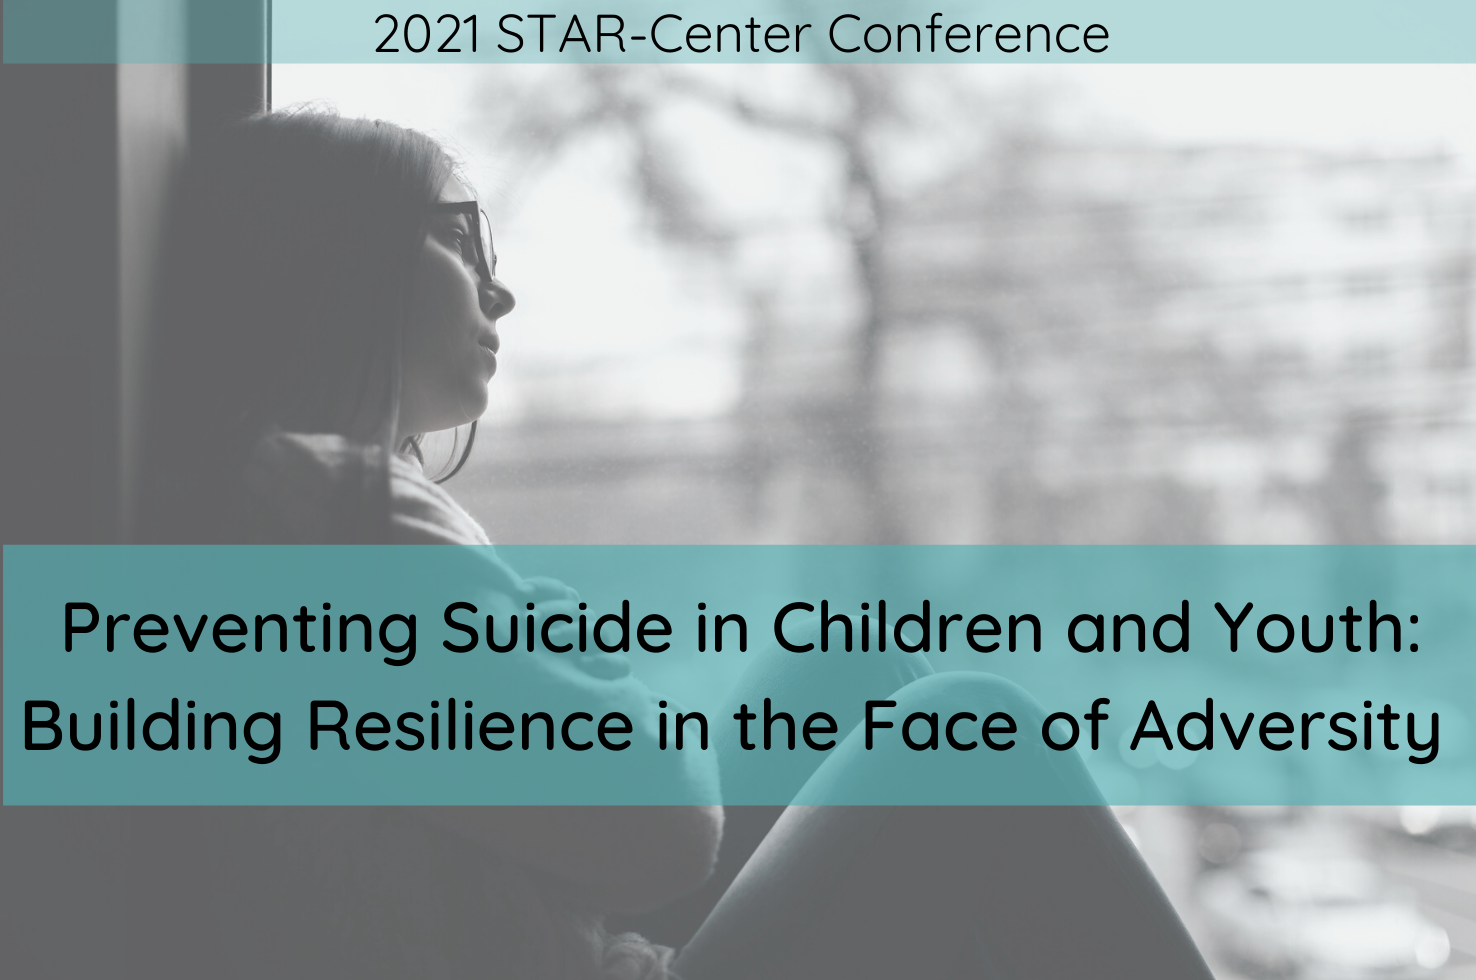 Preventing Suicide in Children and Youth: Building Resilience in the Face of Adversity